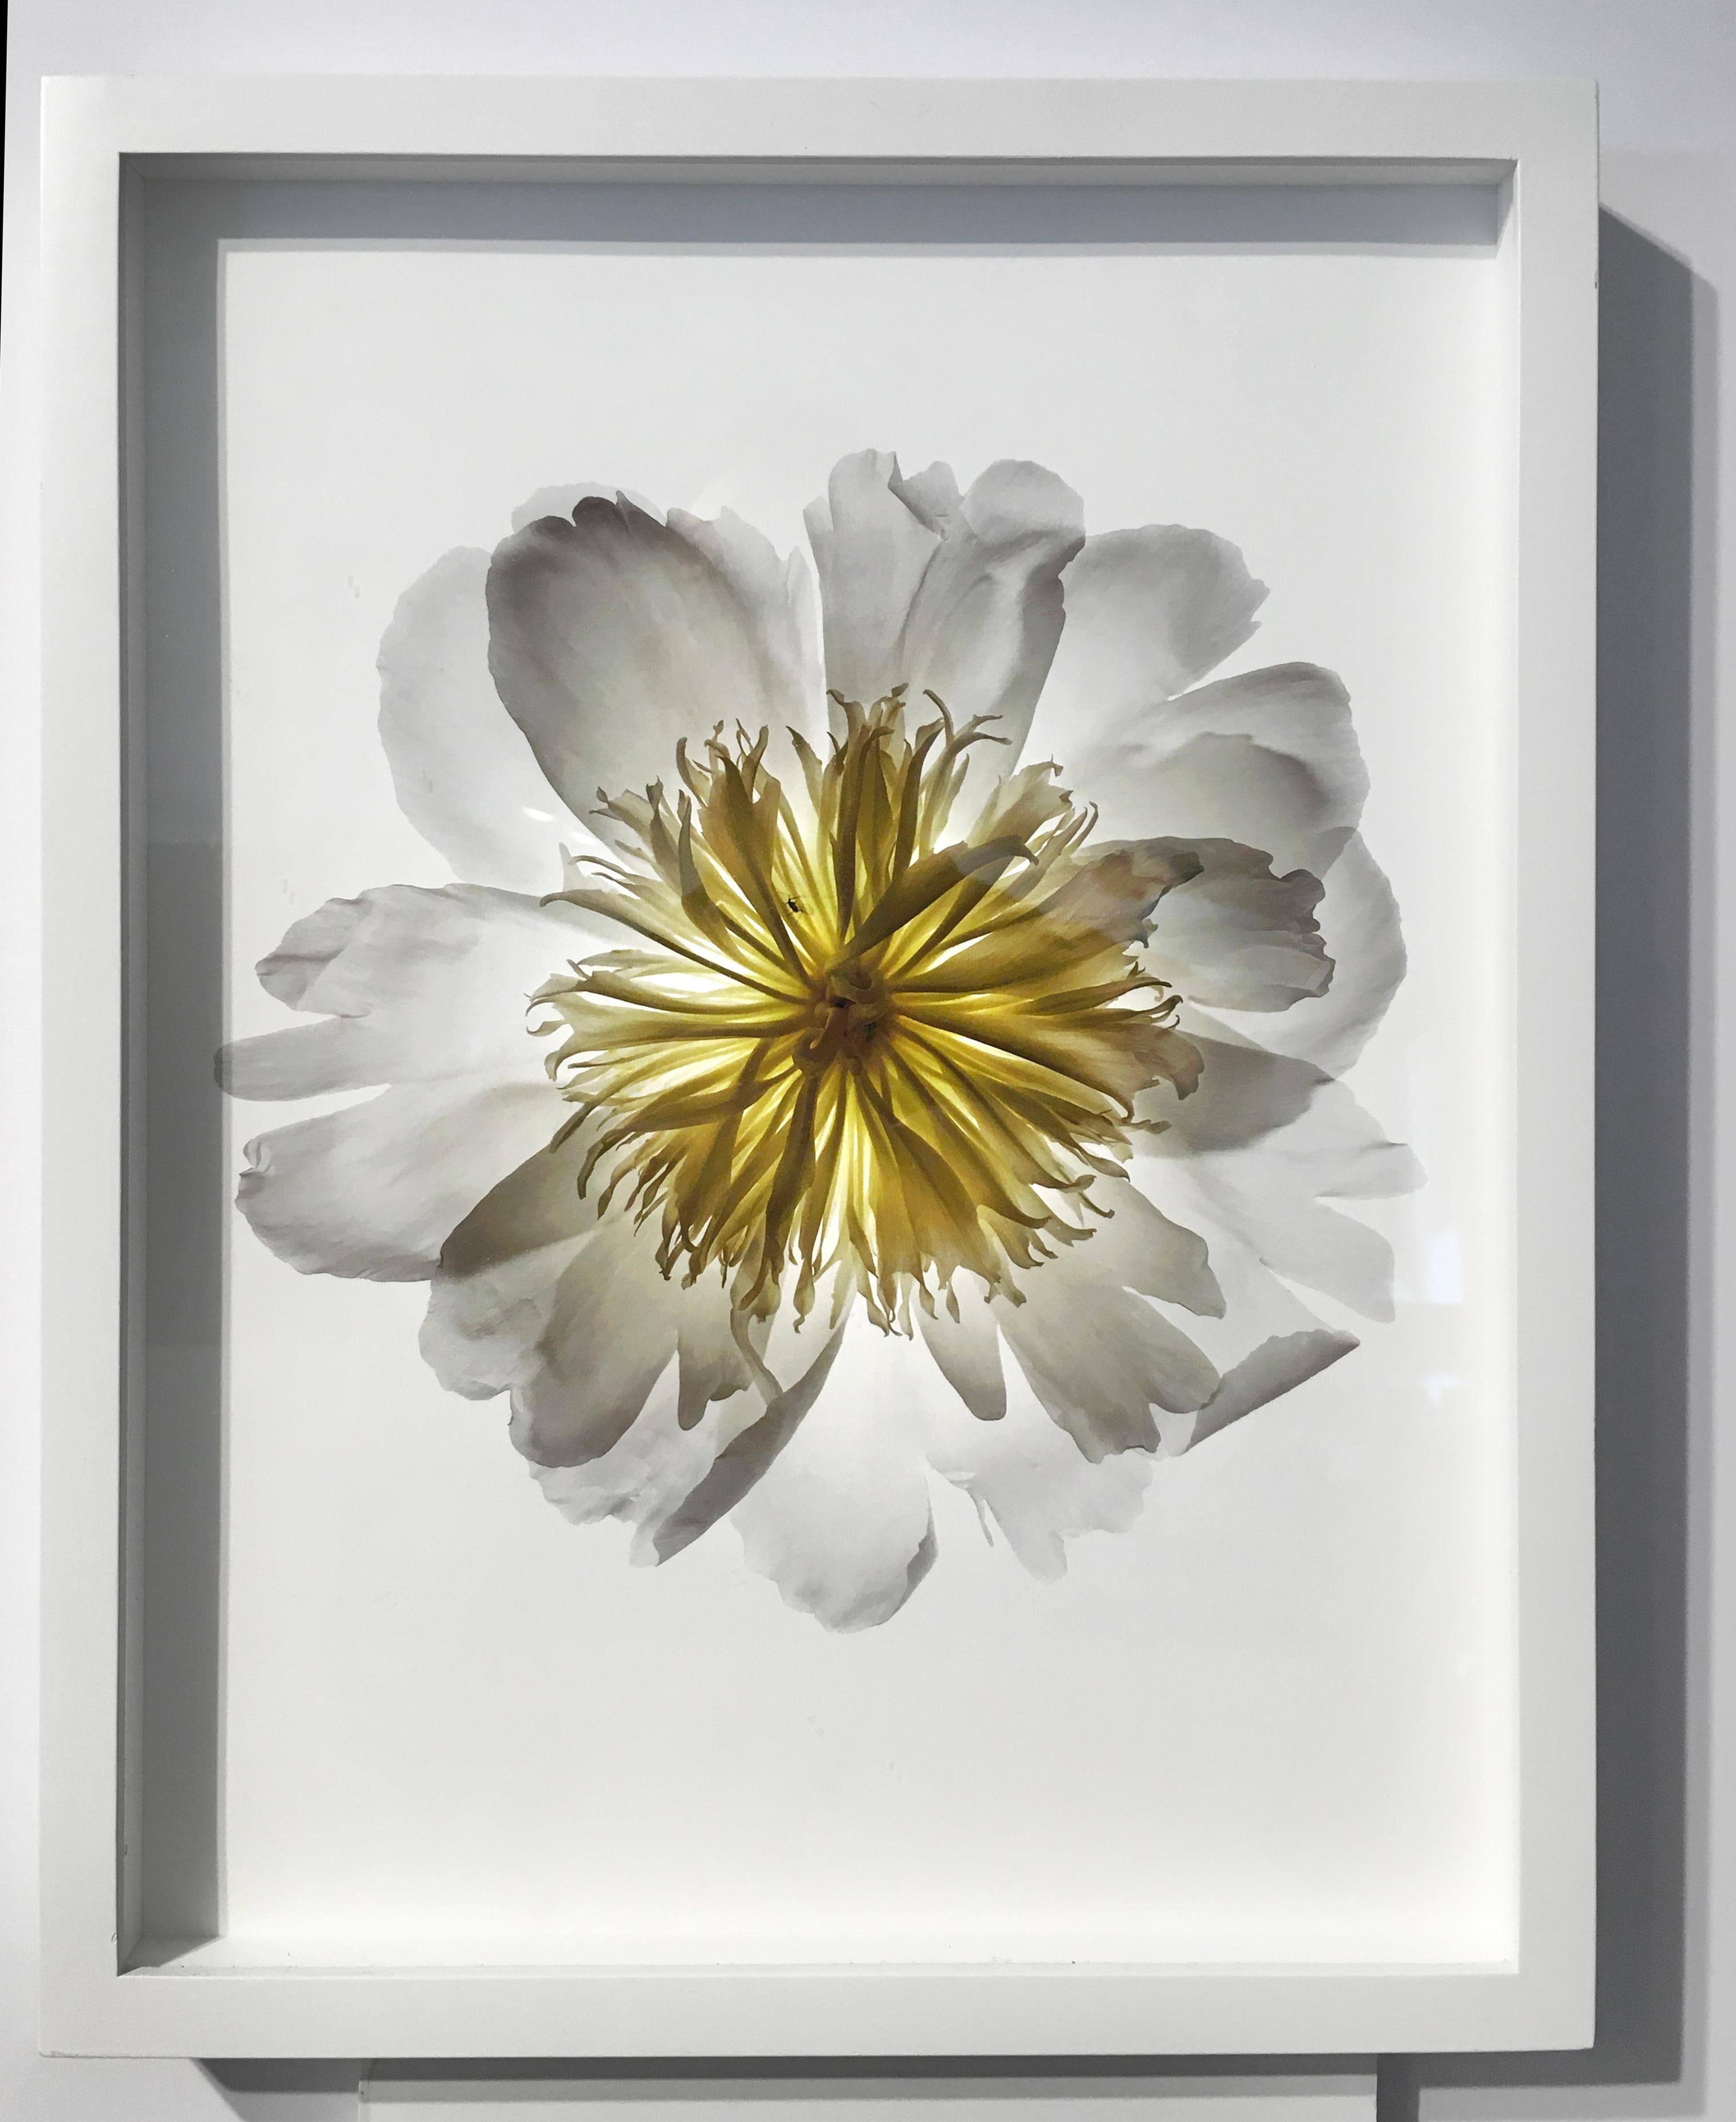 No. 18 (Framed Flower Still Life Photograph of a White Peony on Black)  For Sale 1